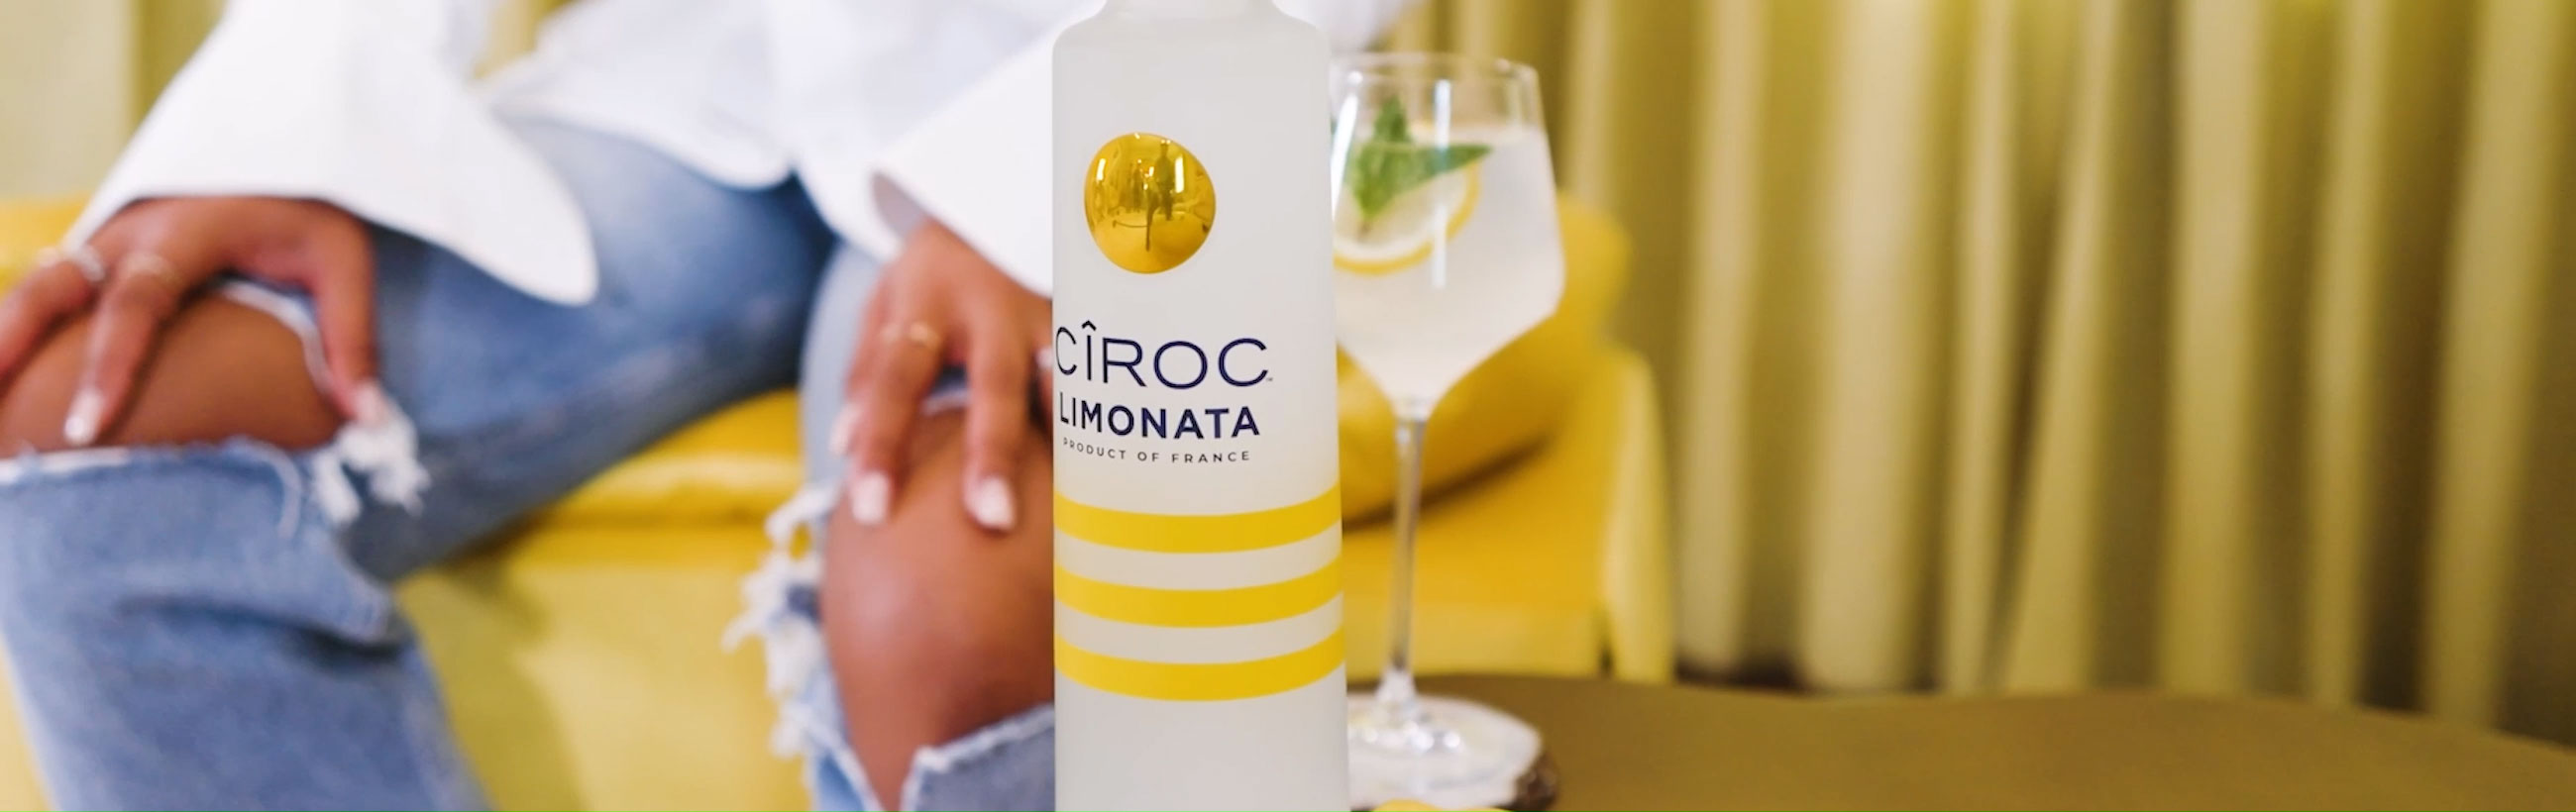 CÎROC Limonata Invites you to Experience a Vacation to the Mediterranean in a City Near You